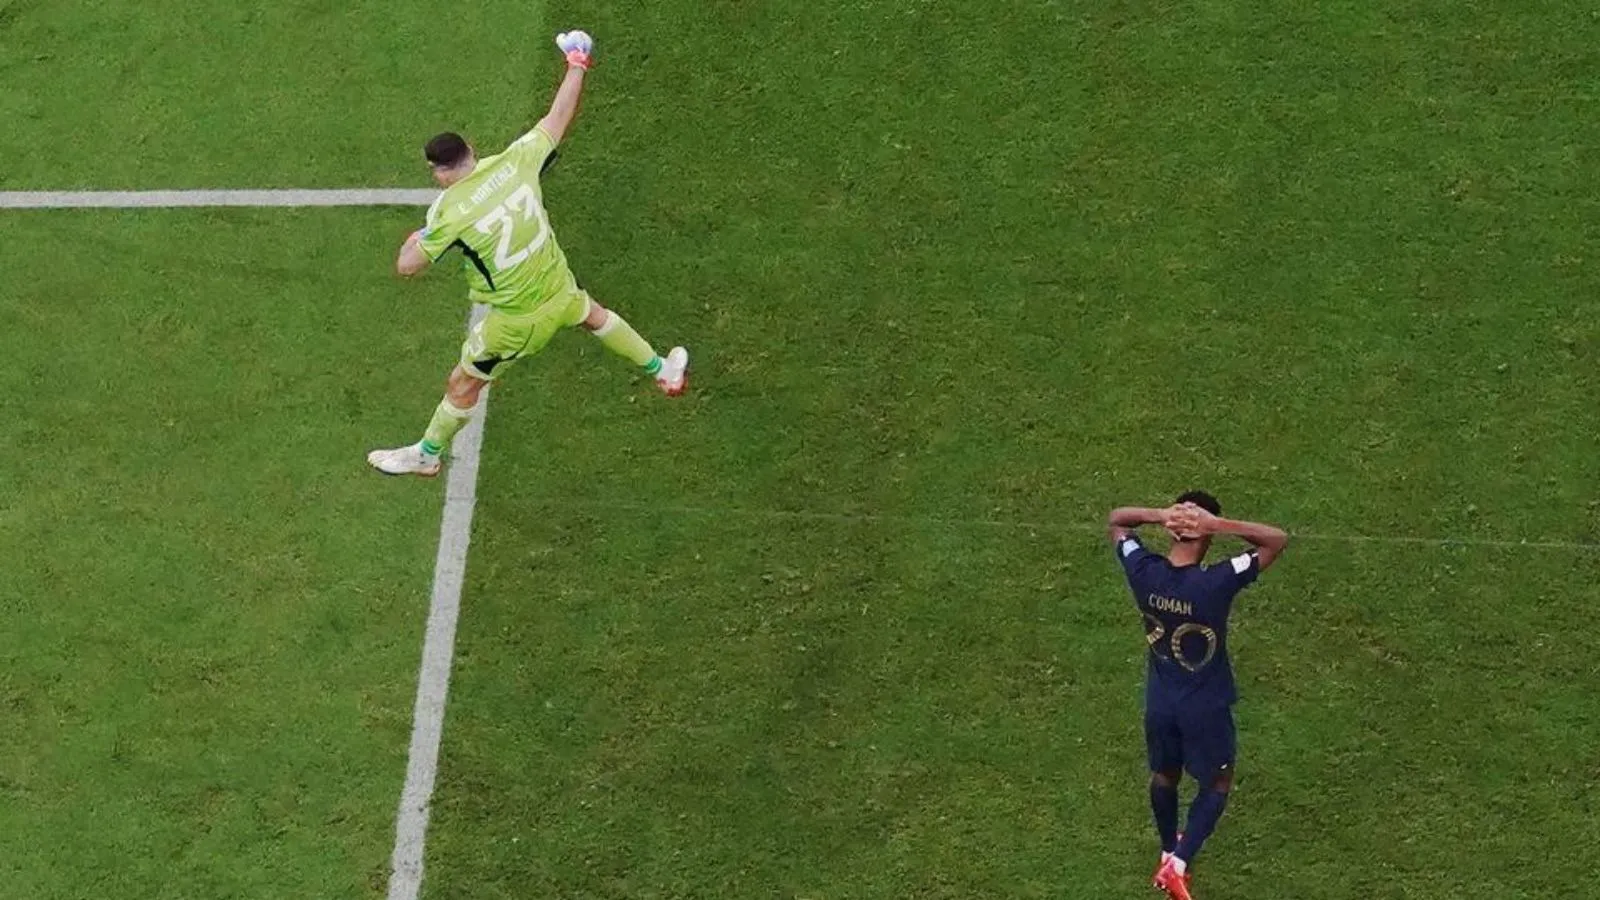 Goalies should dance to distract their opponents during penalty kicks.